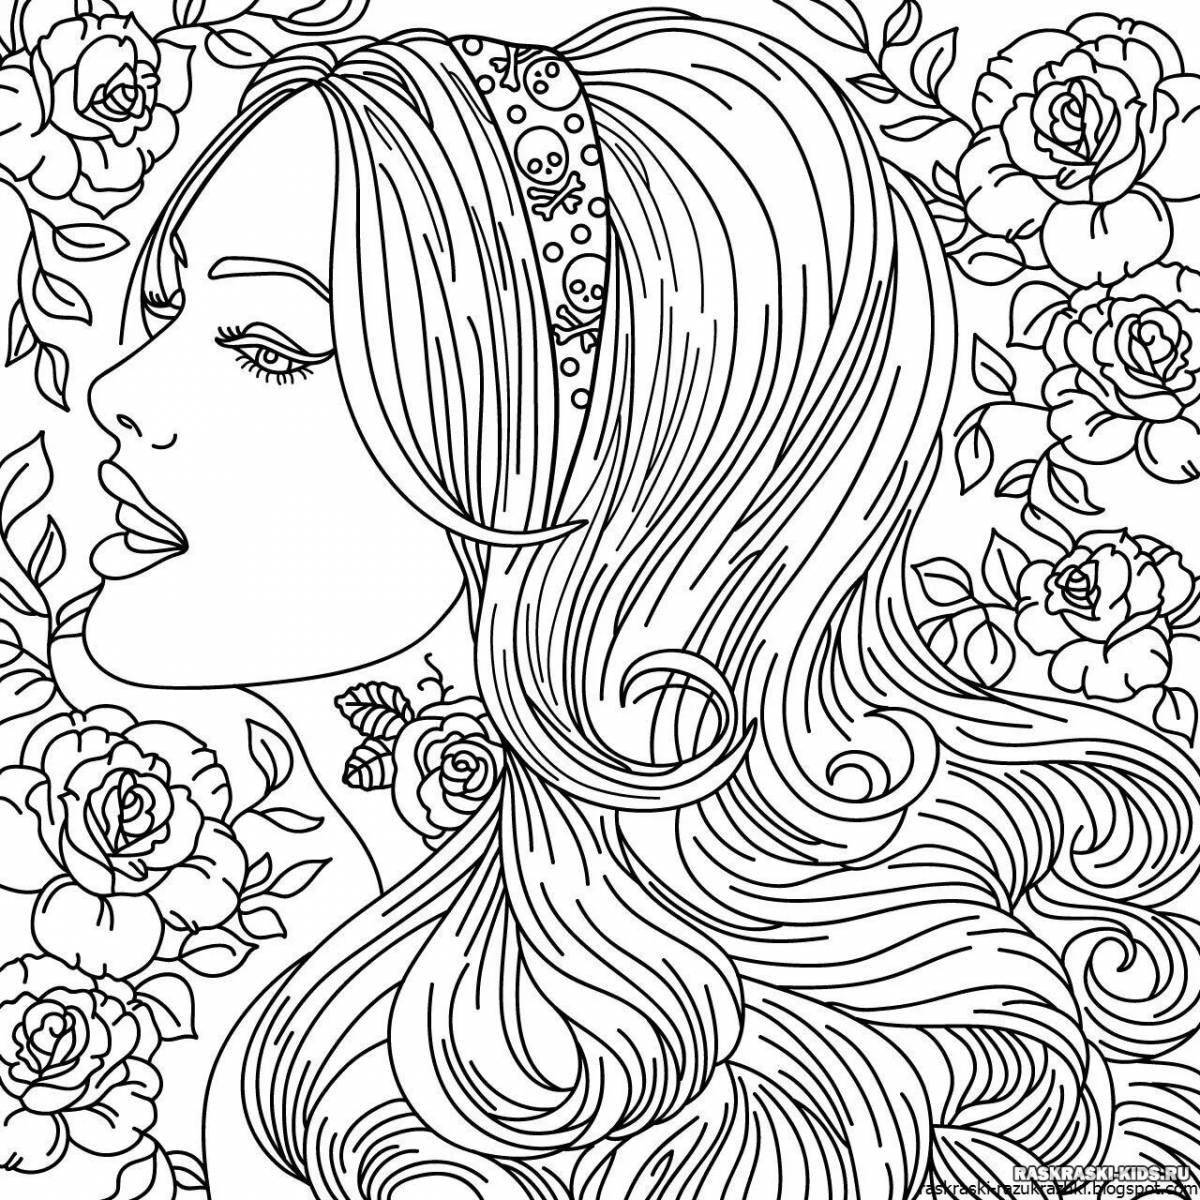 Impressive coloring book popular for 12 year old girls